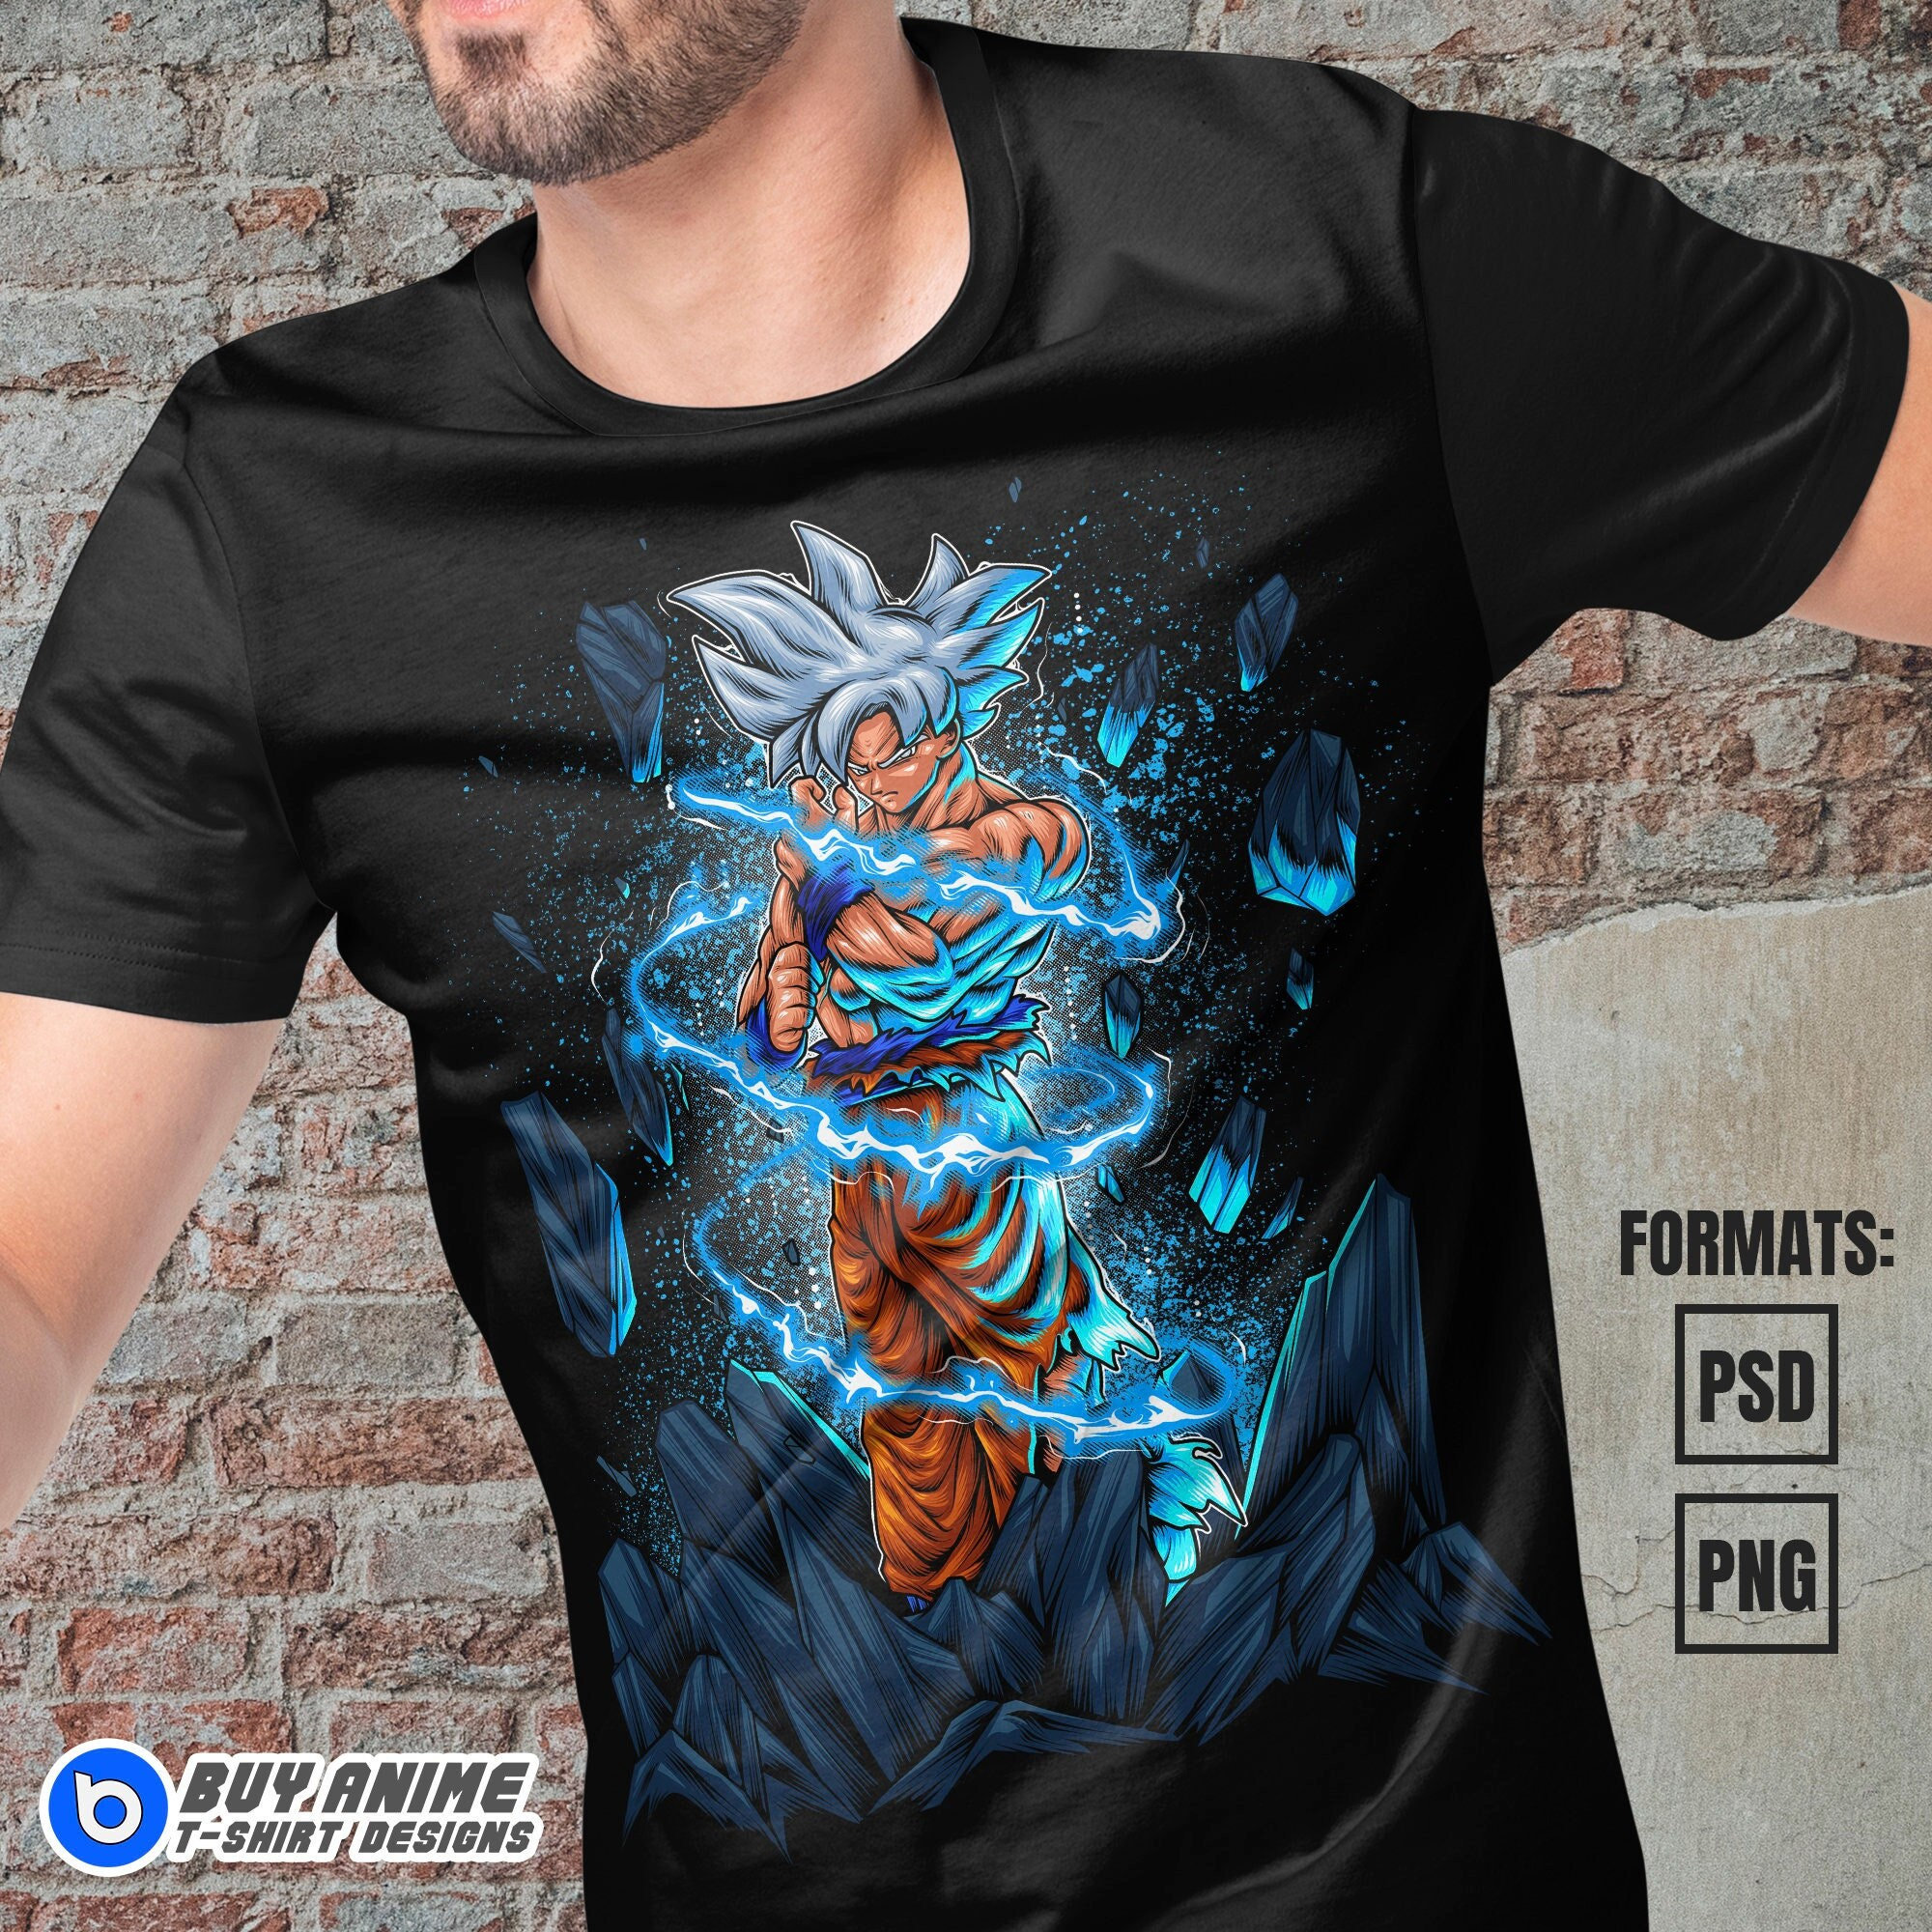 Create a custom anime illustrated t shirt design by Chemistryea | Fiverr